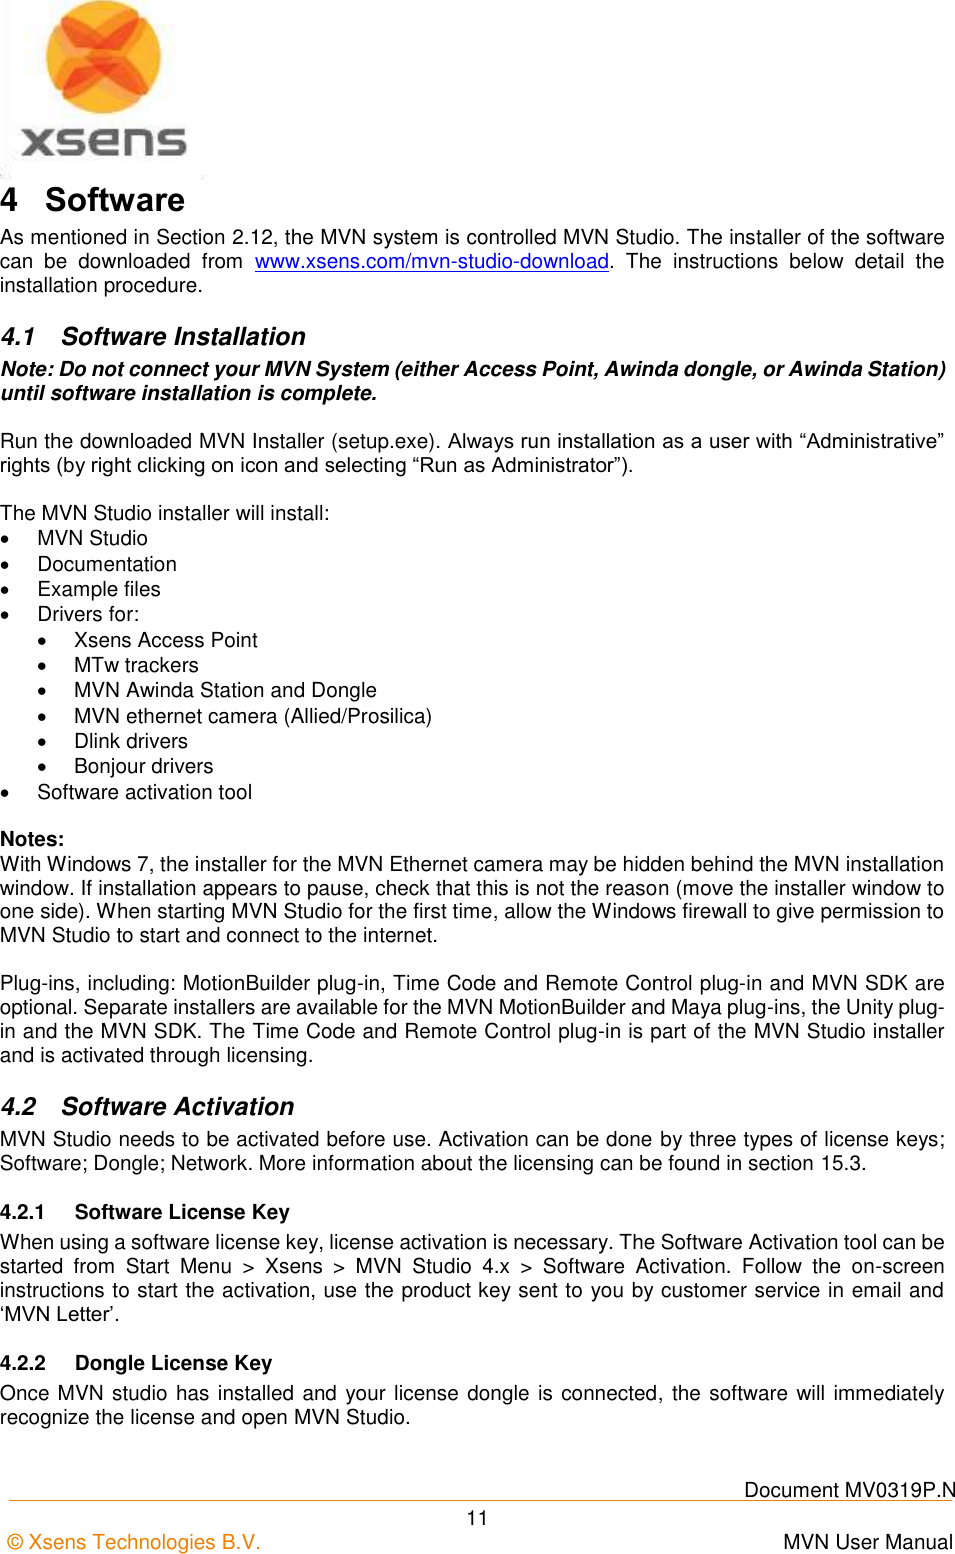    Document MV0319P.N © Xsens Technologies B.V.      MVN User Manual  11 4  Software As mentioned in Section 2.12, the MVN system is controlled MVN Studio. The installer of the software can  be  downloaded  from  www.xsens.com/mvn-studio-download.  The  instructions  below  detail  the installation procedure. 4.1  Software Installation Note: Do not connect your MVN System (either Access Point, Awinda dongle, or Awinda Station) until software installation is complete.  Run the downloaded MVN Installer (setup.exe). Always run installation as a user with “Administrative” rights (by right clicking on icon and selecting “Run as Administrator”).  The MVN Studio installer will install:   MVN Studio   Documentation  Example files   Drivers for:    Xsens Access Point    MTw trackers   MVN Awinda Station and Dongle   MVN ethernet camera (Allied/Prosilica)   Dlink drivers   Bonjour drivers   Software activation tool  Notes: With Windows 7, the installer for the MVN Ethernet camera may be hidden behind the MVN installation window. If installation appears to pause, check that this is not the reason (move the installer window to one side). When starting MVN Studio for the first time, allow the Windows firewall to give permission to MVN Studio to start and connect to the internet.  Plug-ins, including: MotionBuilder plug-in, Time Code and Remote Control plug-in and MVN SDK are optional. Separate installers are available for the MVN MotionBuilder and Maya plug-ins, the Unity plug-in and the MVN SDK. The Time Code and Remote Control plug-in is part of the MVN Studio installer and is activated through licensing. 4.2  Software Activation MVN Studio needs to be activated before use. Activation can be done by three types of license keys; Software; Dongle; Network. More information about the licensing can be found in section 15.3. 4.2.1  Software License Key When using a software license key, license activation is necessary. The Software Activation tool can be started  from  Start  Menu  &gt;  Xsens  &gt;  MVN  Studio  4.x  &gt;  Software  Activation.  Follow  the  on-screen instructions to start the activation, use the product key sent to you by customer service in email and ‘MVN Letter’. 4.2.2  Dongle License Key Once MVN studio has installed and  your license dongle is connected, the software will immediately recognize the license and open MVN Studio. 